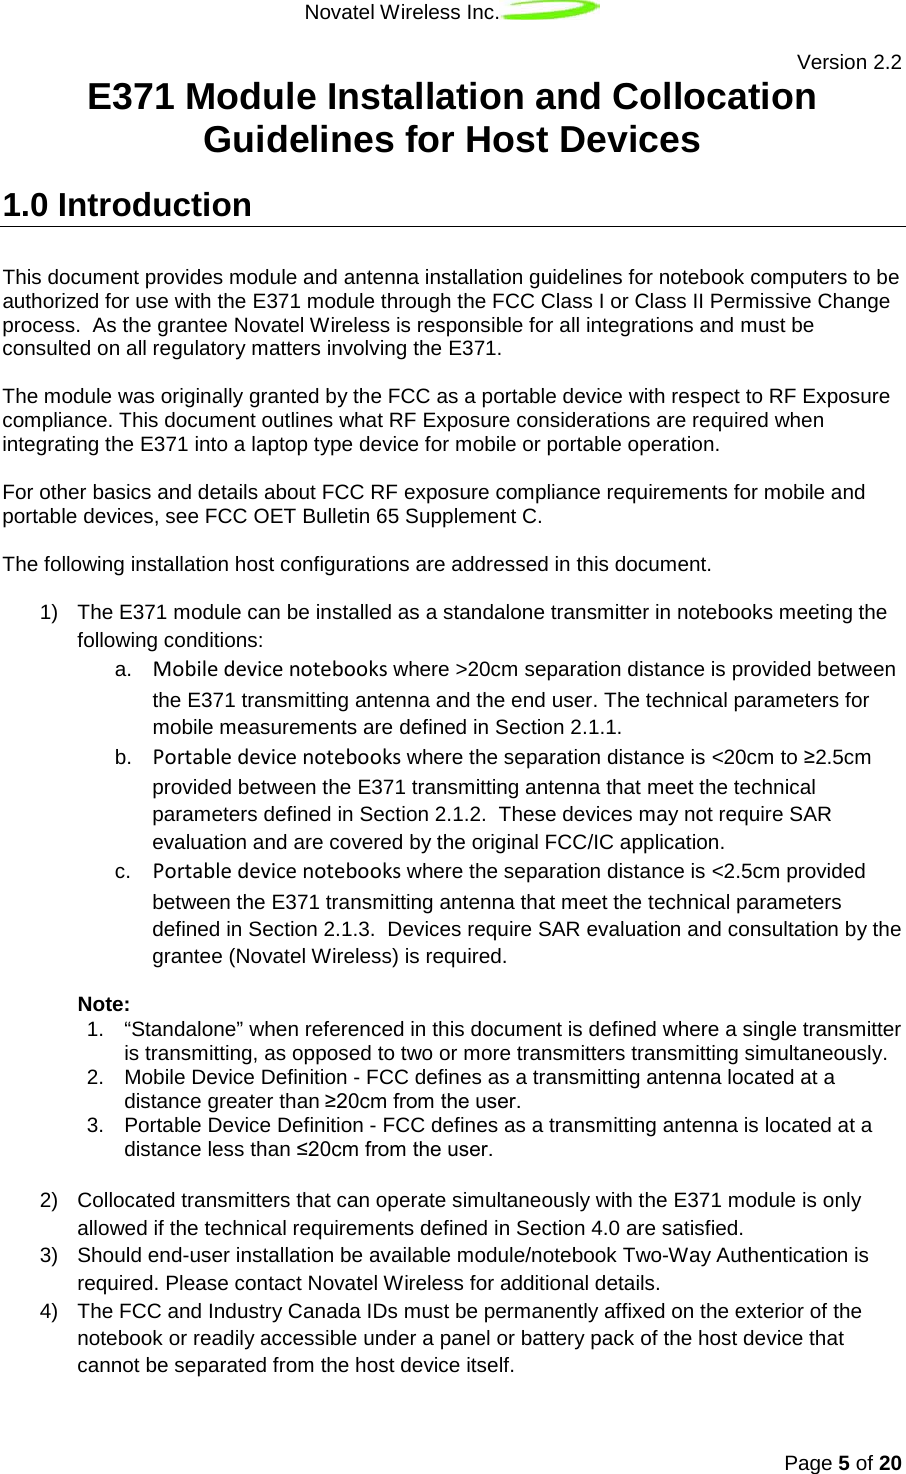 Novatel Wireless Inc.   Version 2.2 Page 5 of 20  E371 Module Installation and Collocation Guidelines for Host Devices 1.0 Introduction This document provides module and antenna installation guidelines for notebook computers to be authorized for use with the E371 module through the FCC Class I or Class II Permissive Change process.  As the grantee Novatel Wireless is responsible for all integrations and must be consulted on all regulatory matters involving the E371.   The module was originally granted by the FCC as a portable device with respect to RF Exposure compliance. This document outlines what RF Exposure considerations are required when integrating the E371 into a laptop type device for mobile or portable operation.  For other basics and details about FCC RF exposure compliance requirements for mobile and portable devices, see FCC OET Bulletin 65 Supplement C.  The following installation host configurations are addressed in this document.   1) The E371 module can be installed as a standalone transmitter in notebooks meeting the following conditions: a. Mobile device notebooks where &gt;20cm separation distance is provided between the E371 transmitting antenna and the end user. The technical parameters for mobile measurements are defined in Section 2.1.1. b. Portable device notebooks where the separation distance is &lt;20cm to ≥2.5cm provided between the E371 transmitting antenna that meet the technical parameters defined in Section 2.1.2.  These devices may not require SAR evaluation and are covered by the original FCC/IC application.  c. Portable device notebooks where the separation distance is &lt;2.5cm provided between the E371 transmitting antenna that meet the technical parameters defined in Section 2.1.3.  Devices require SAR evaluation and consultation by the grantee (Novatel Wireless) is required.  Note:  1. “Standalone” when referenced in this document is defined where a single transmitter is transmitting, as opposed to two or more transmitters transmitting simultaneously. 2. Mobile Device Definition - FCC defines as a transmitting antenna located at a distance greater than ≥20cm from the user. 3. Portable Device Definition - FCC defines as a transmitting antenna is located at a distance less than ≤20cm from the user.  2)  Collocated transmitters that can operate simultaneously with the E371 module is only allowed if the technical requirements defined in Section 4.0 are satisfied.  3) Should end-user installation be available module/notebook Two-Way Authentication is required. Please contact Novatel Wireless for additional details. 4) The FCC and Industry Canada IDs must be permanently affixed on the exterior of the notebook or readily accessible under a panel or battery pack of the host device that cannot be separated from the host device itself. 